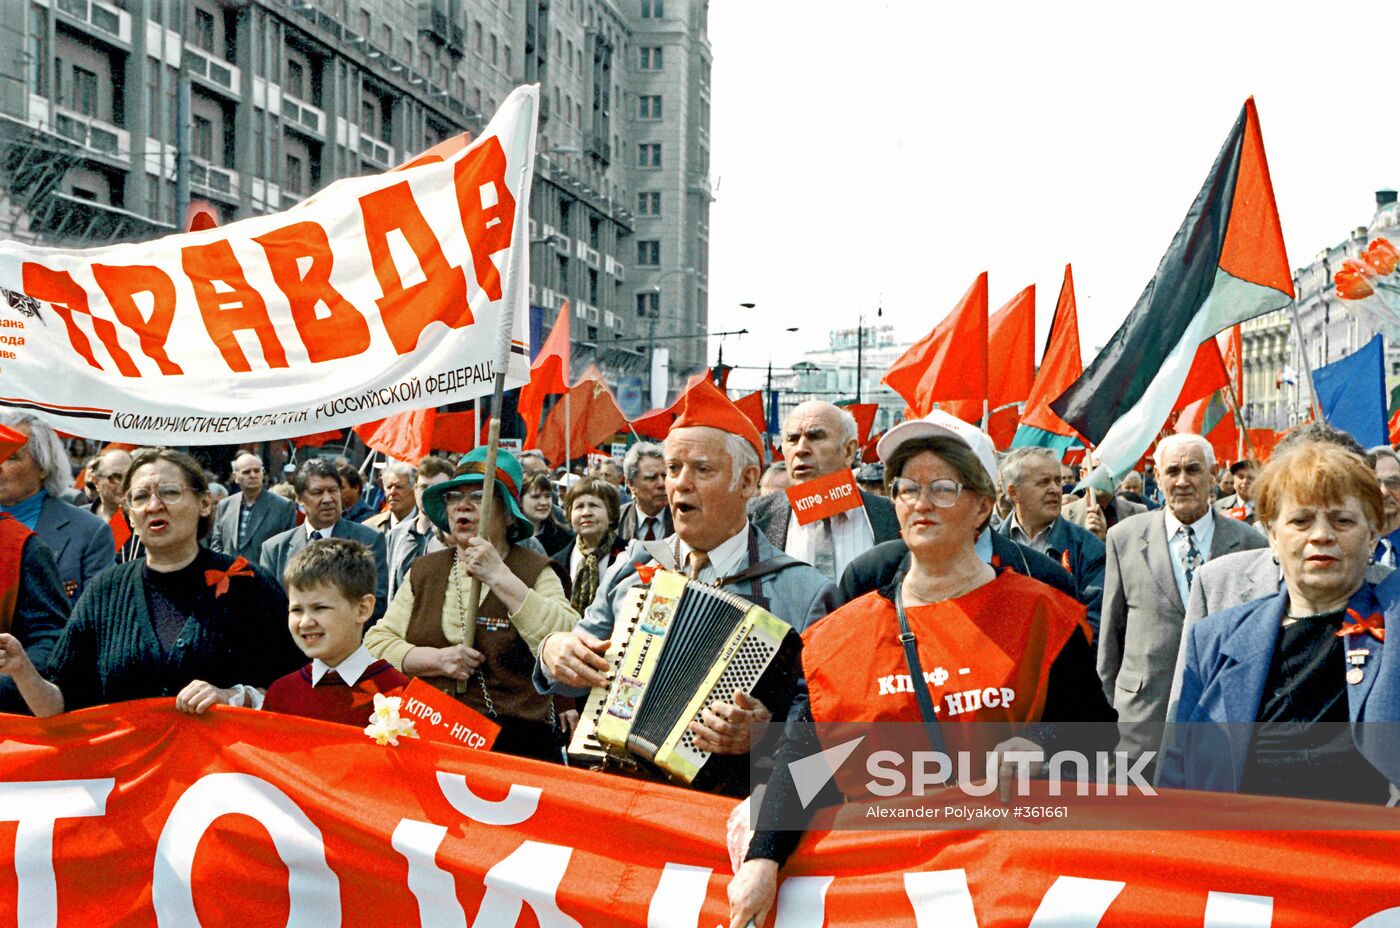 May Day holiday in Moscow